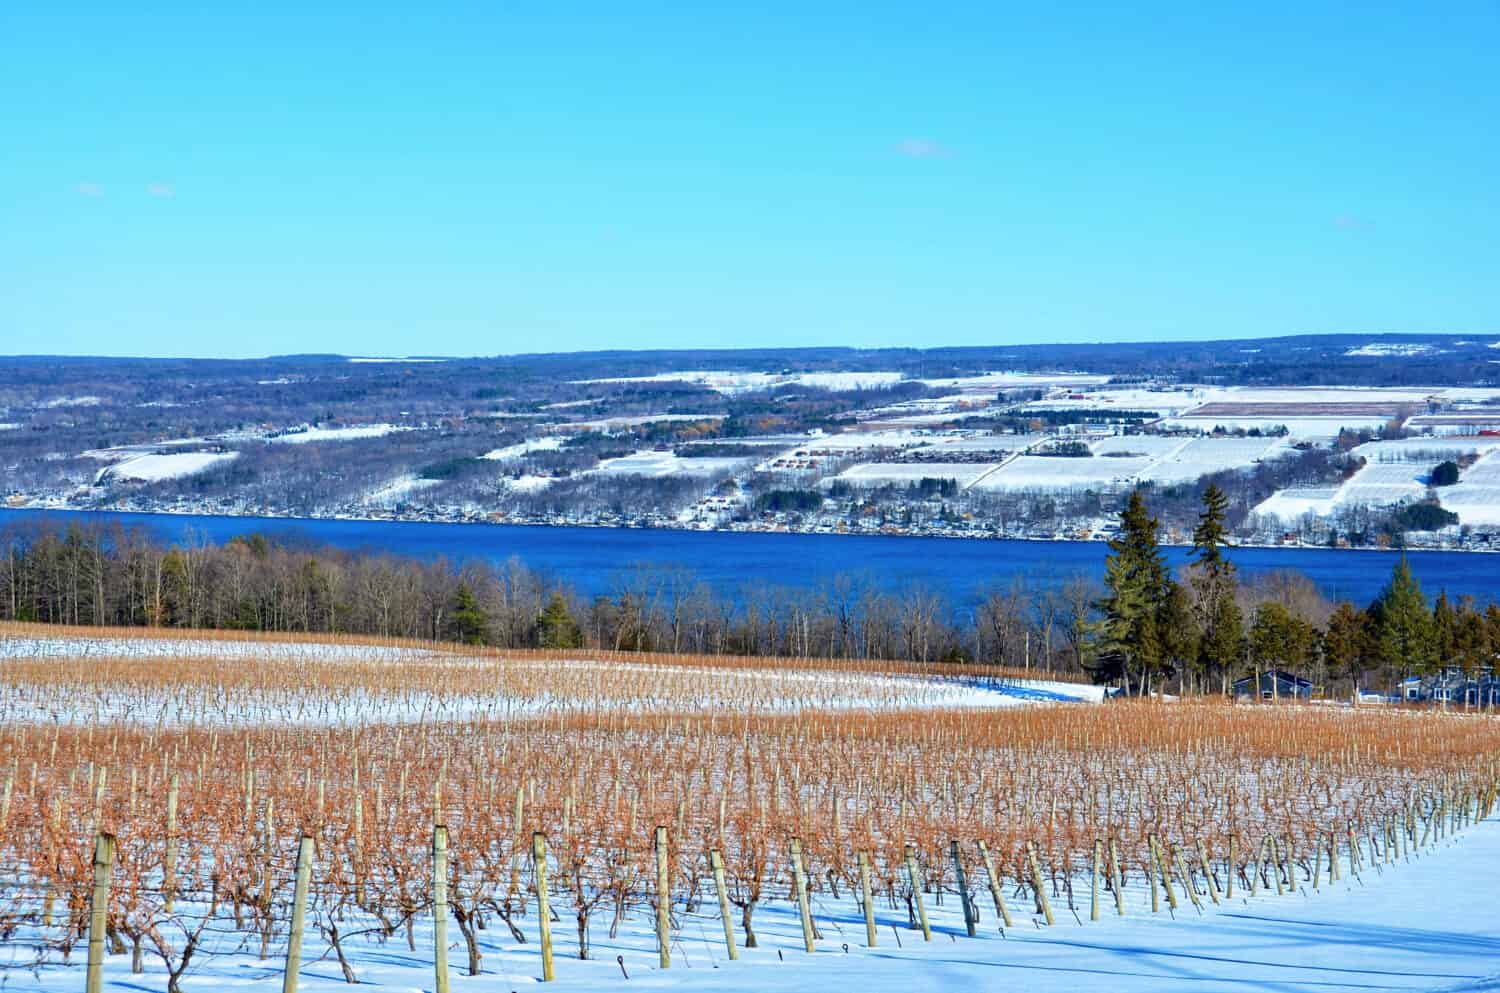 Winter Landscape with grape vineyard, hills and Seneca Lake, in the heart of Finger Lakes Wine Country, New York. Seneca Lake is the deepest lake entirely within the state. 